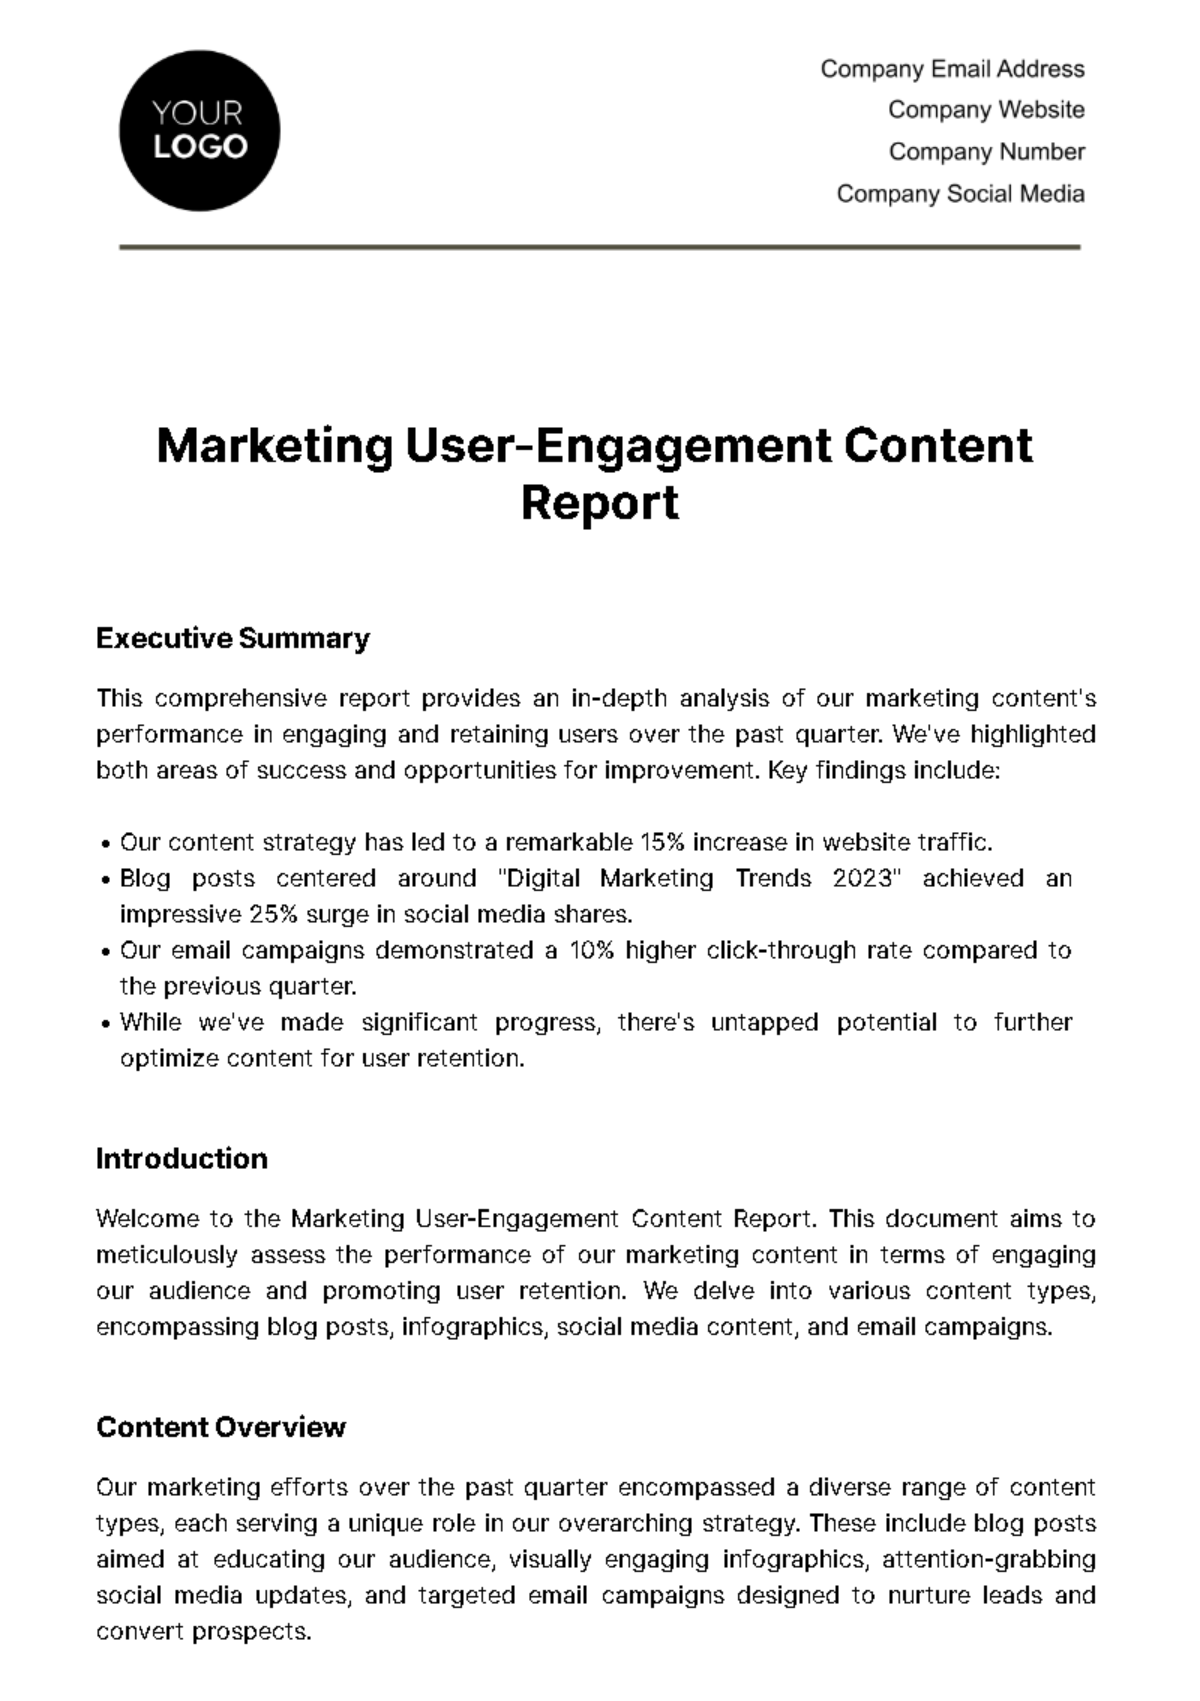 Marketing User-Engagement Content Report Template